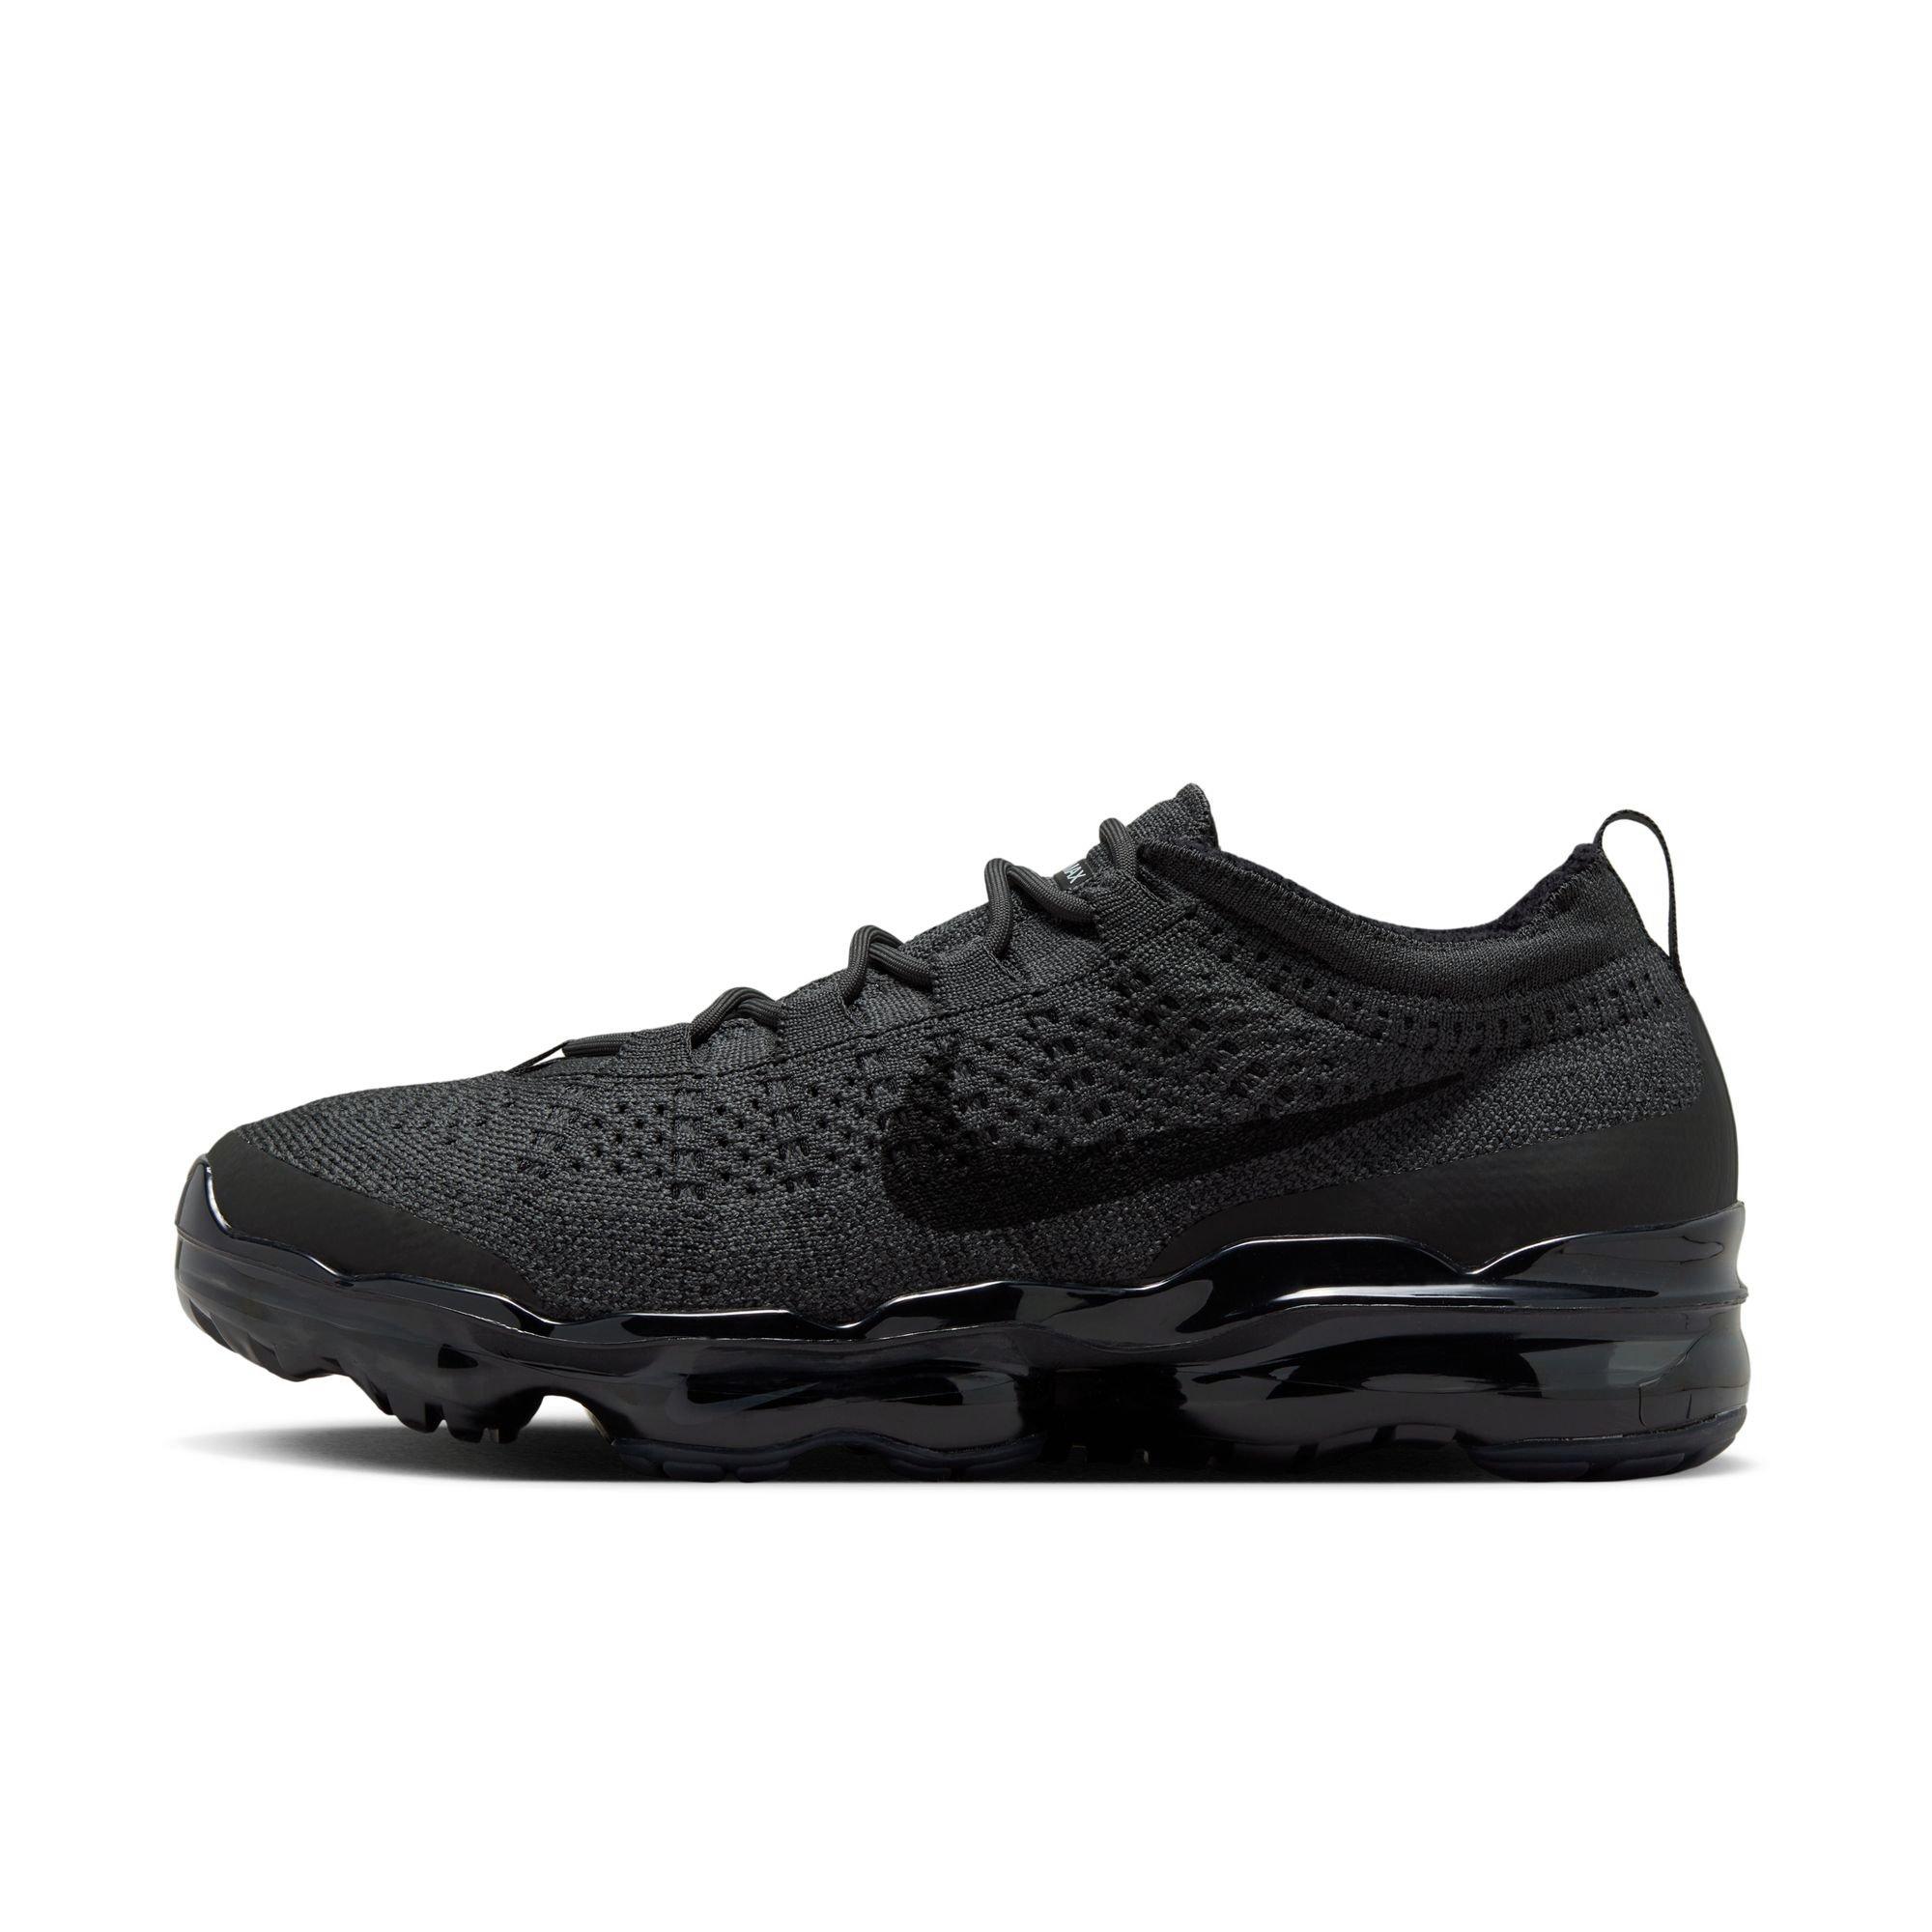 Men's Air Vapormax Running Shoes from Nike | Team Town Sports